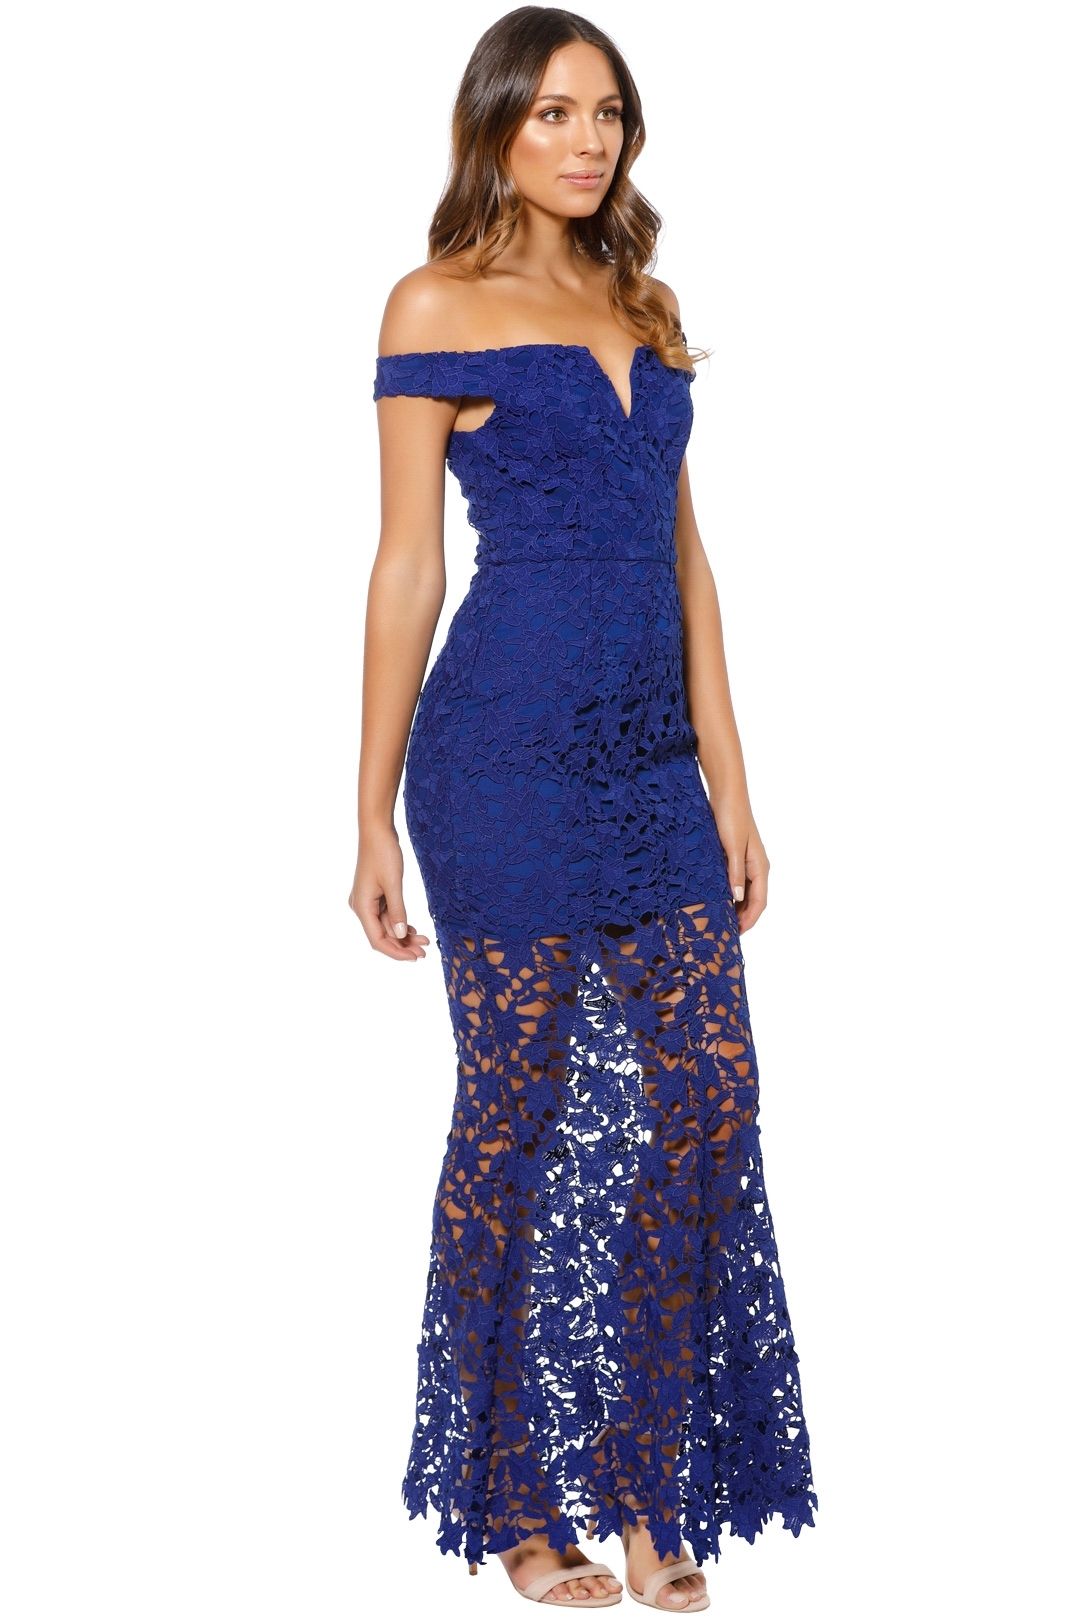 Grace and Hart- Heart beat Gown - Royale - Side